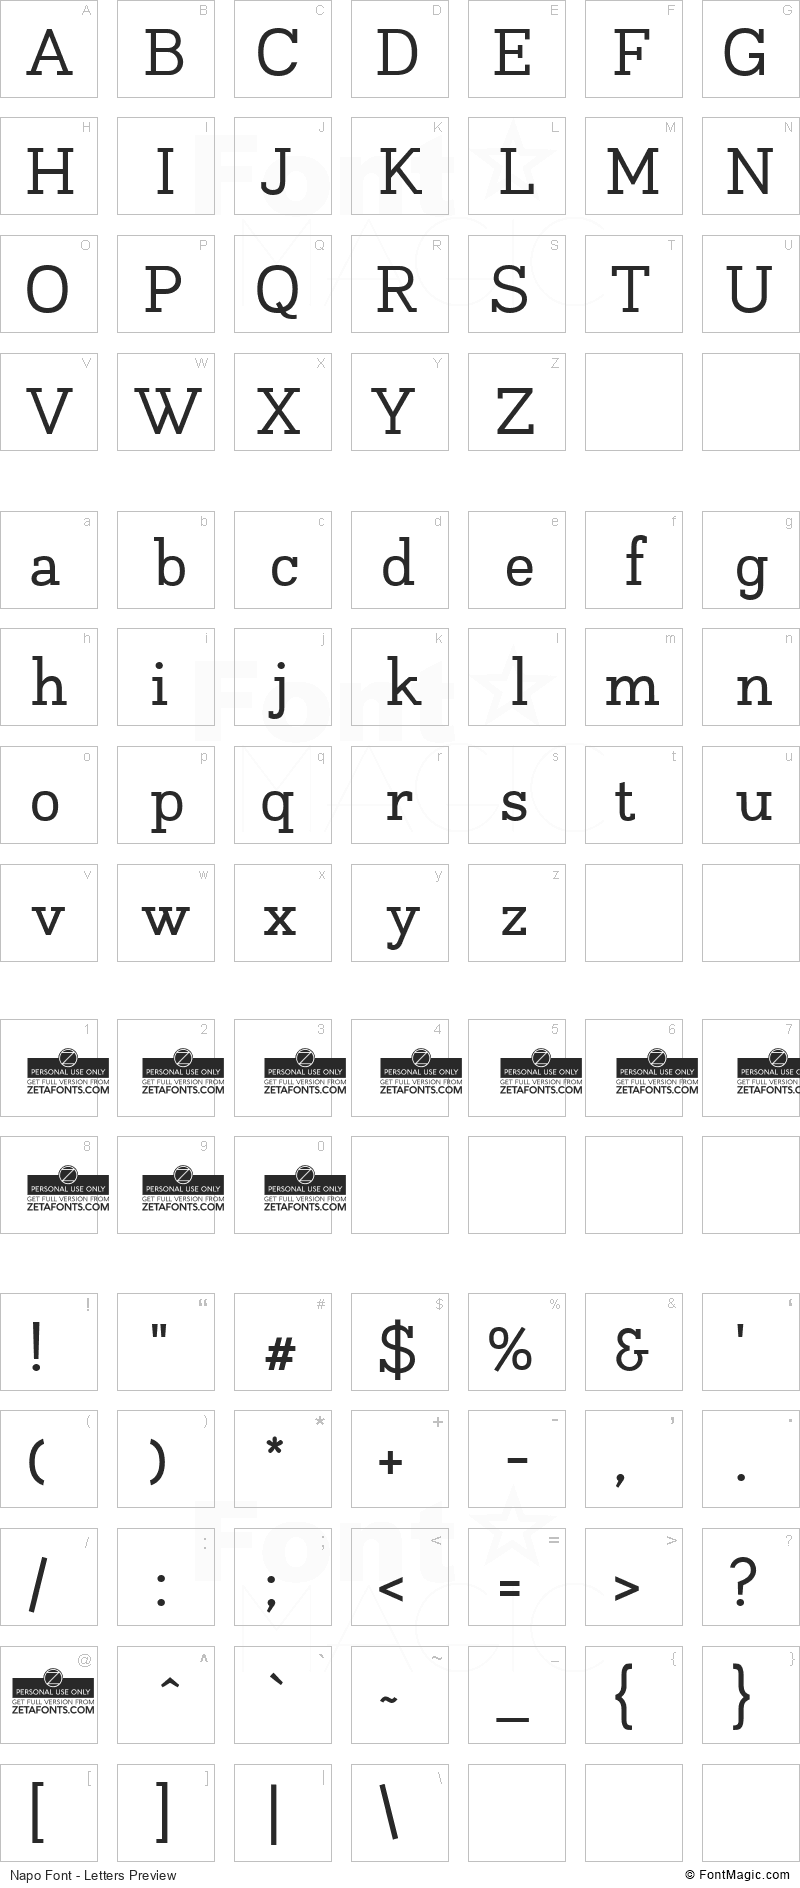 Napo Font - All Latters Preview Chart